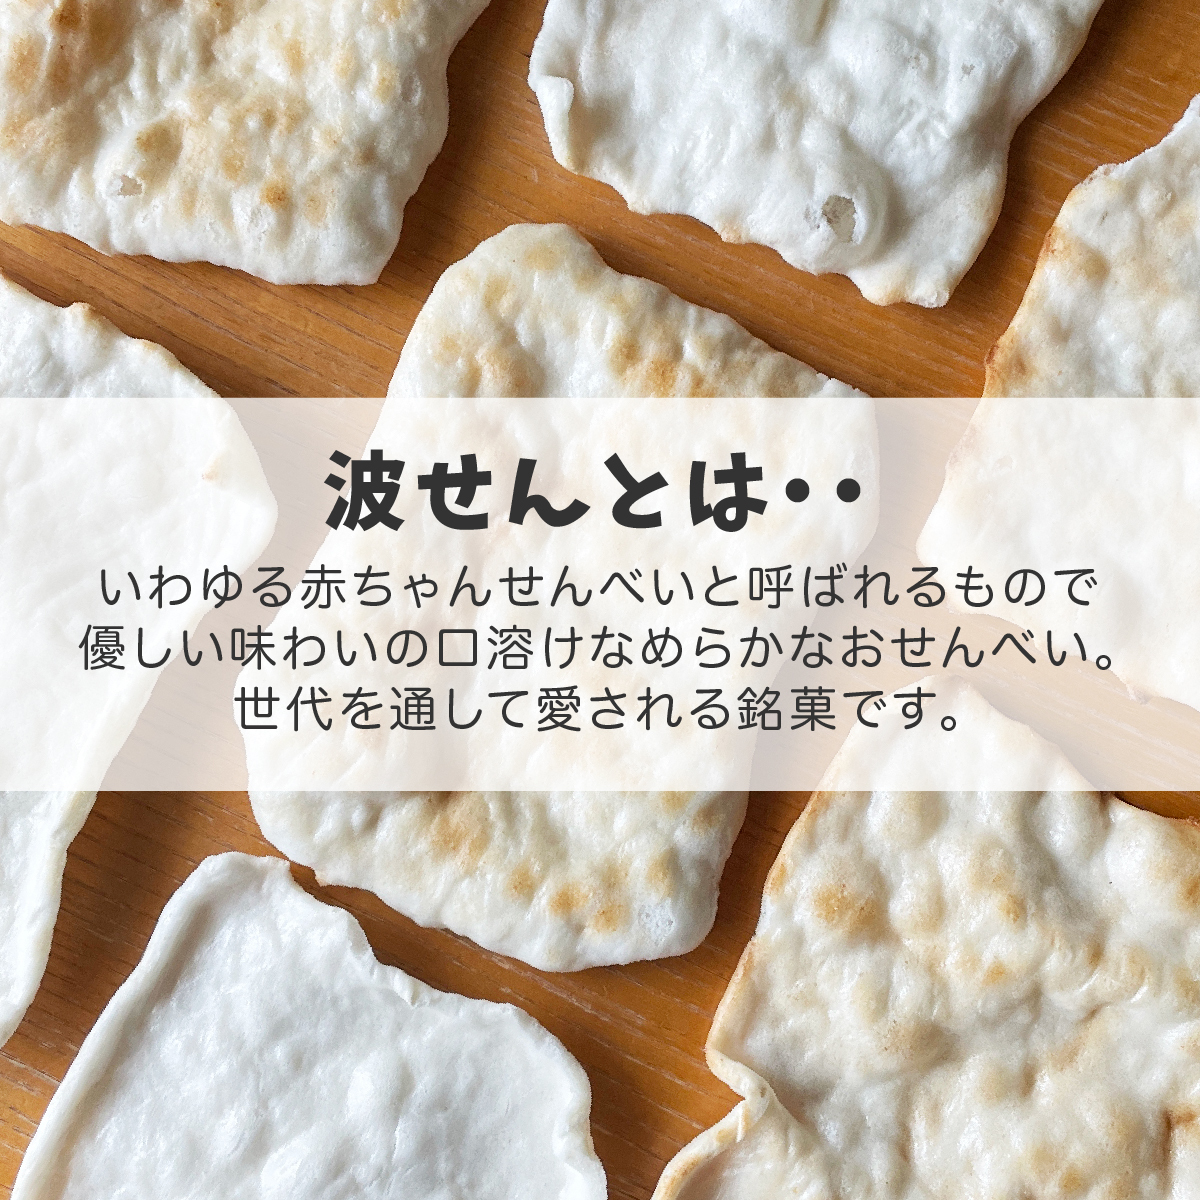  free shipping kind taste ...... rice cracker baby rice cracker less selection another handmade wave rice cracker 2 sack ×10 sheets entering . mochi rice cracker rice .